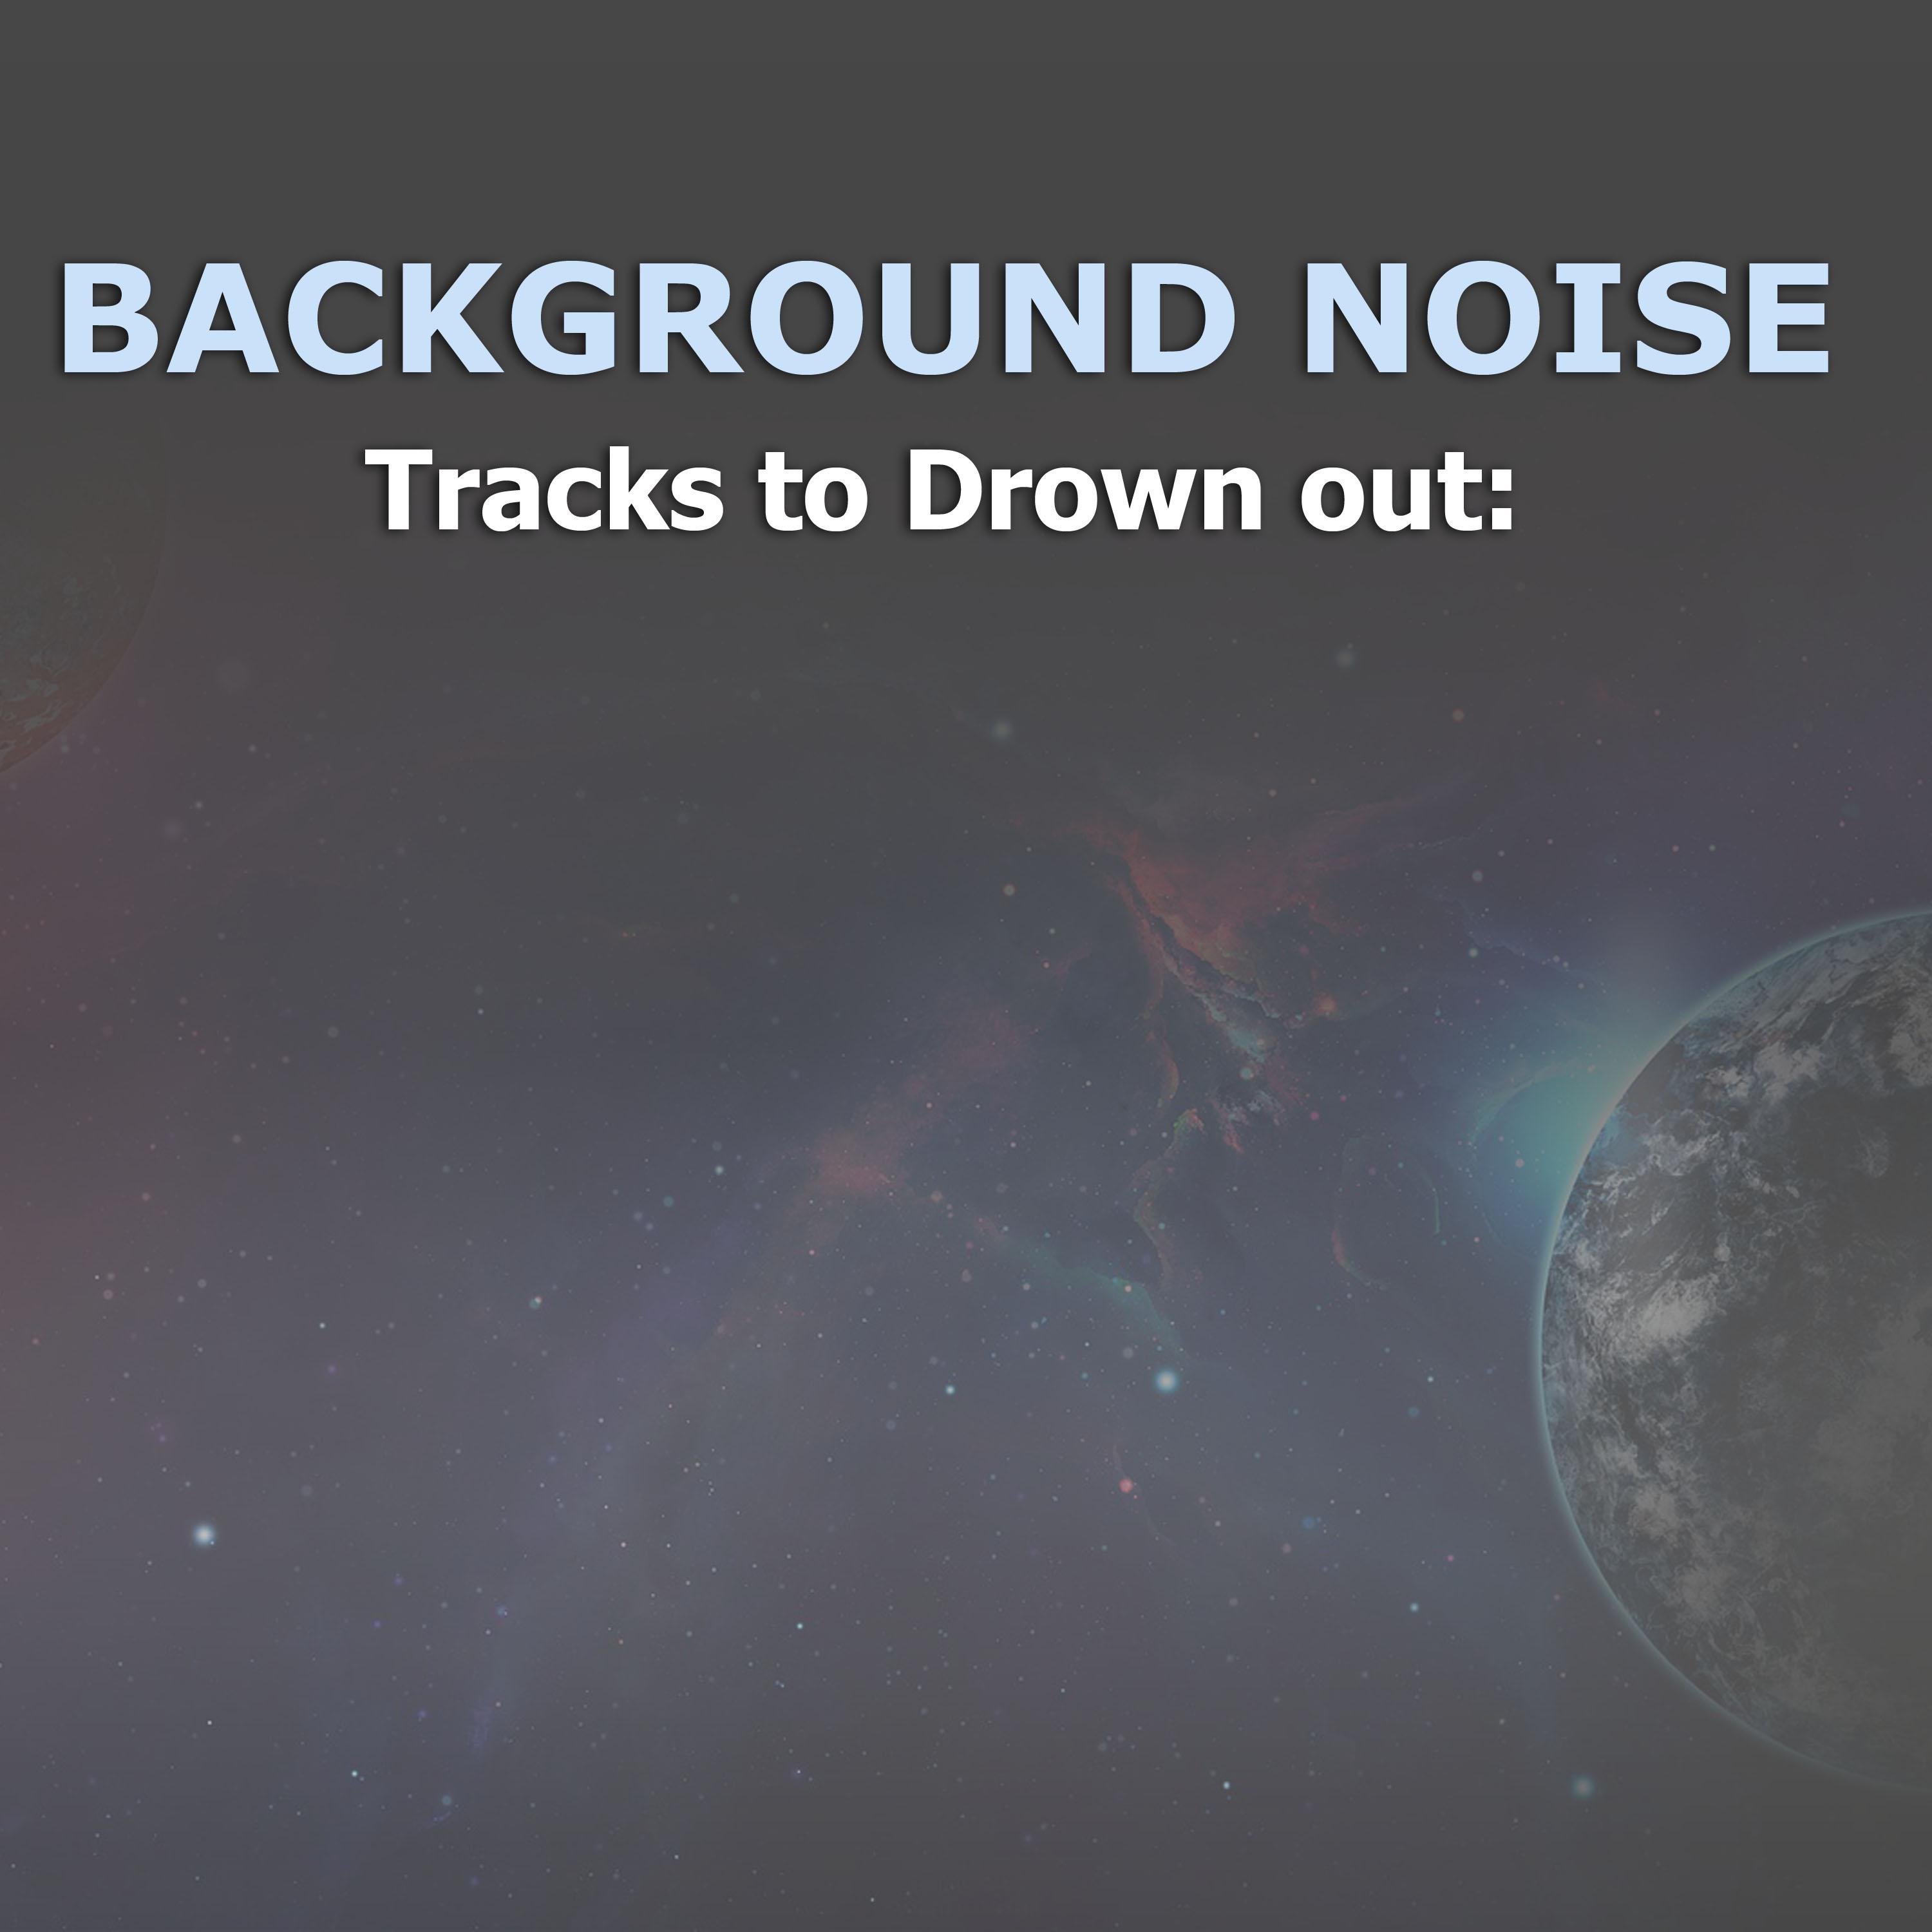 13 Tracks to Drown out Background Noise